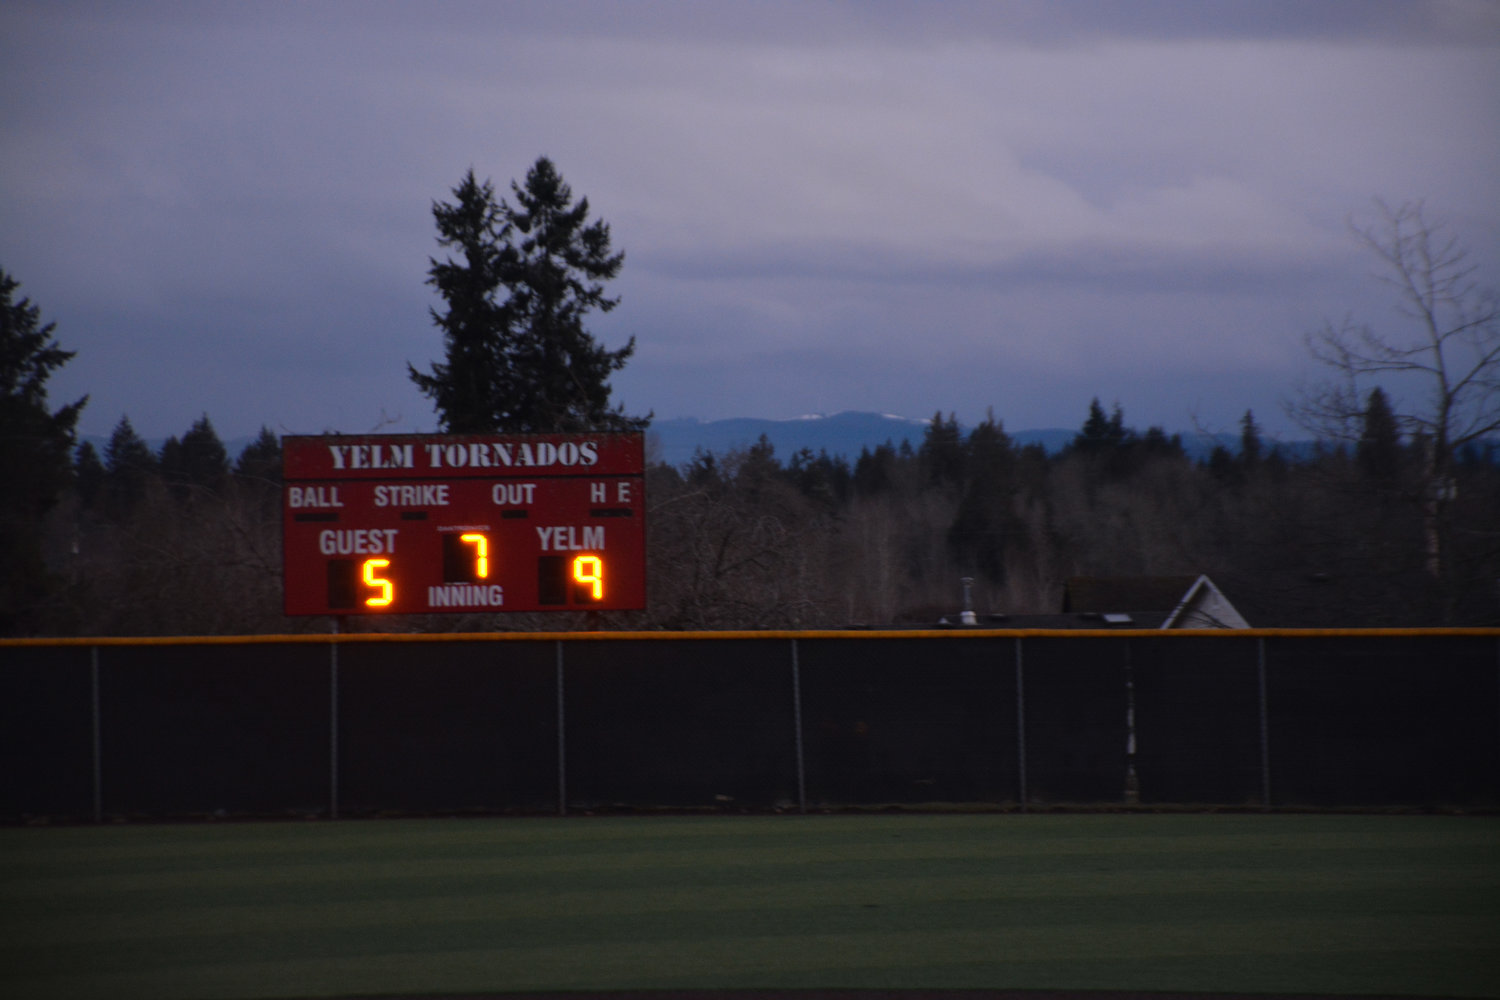 Snowy mountain caps sit behind the final 9-5 score of the Yelm versus Rainier game on Friday, March 10.